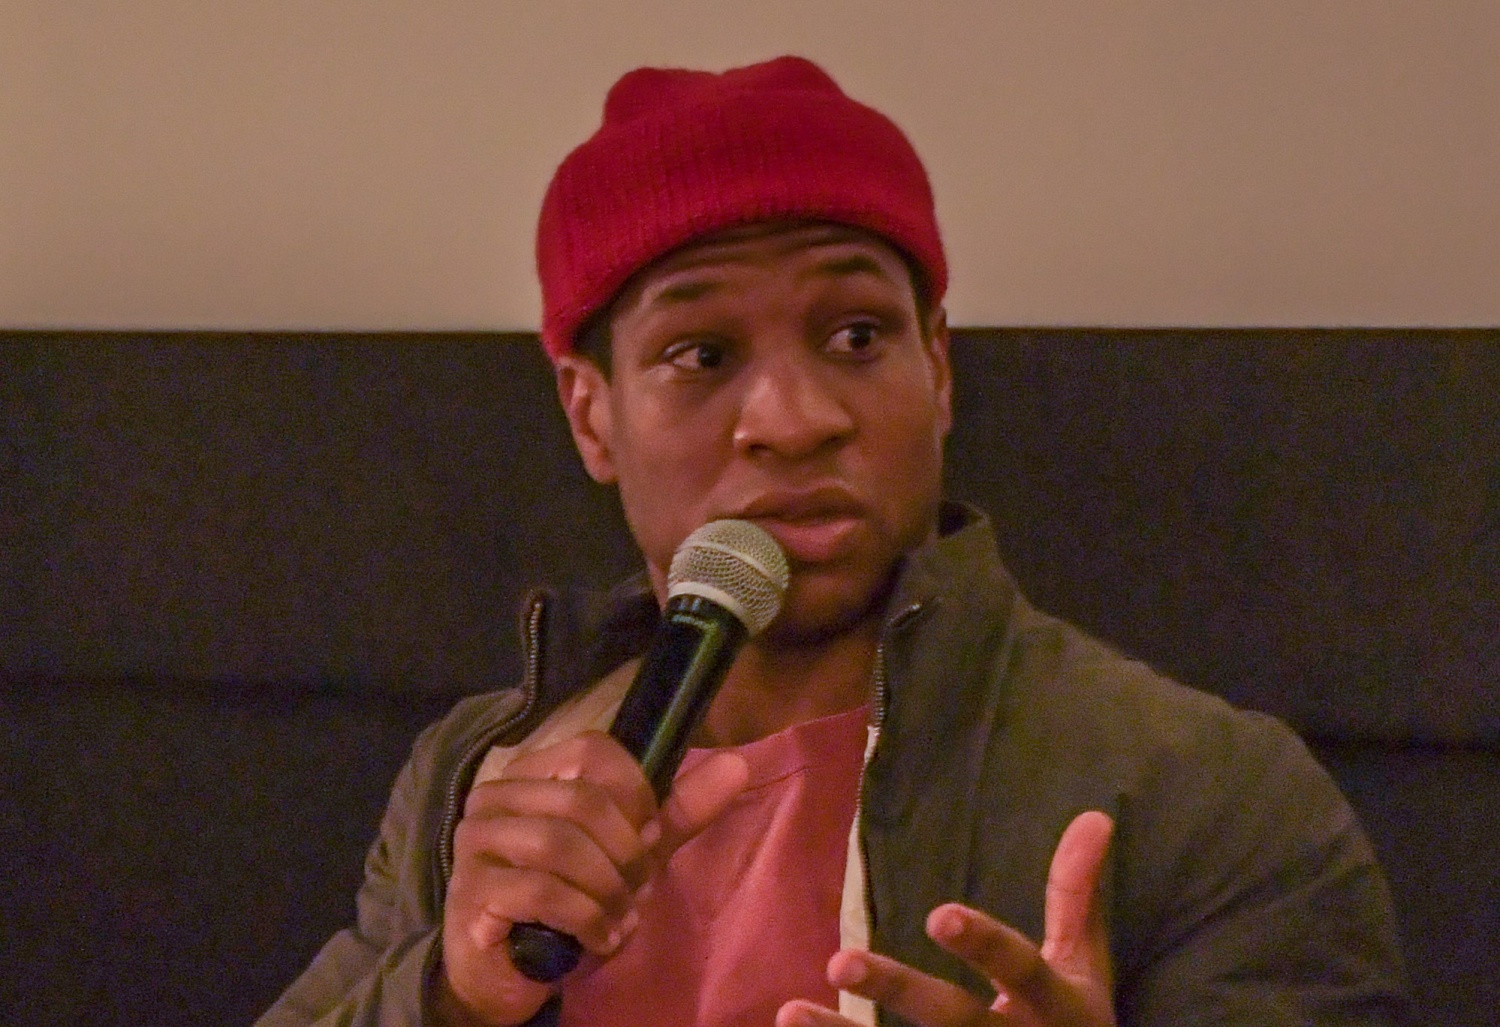 "The Harder They Fall" Awards Screening And Q&A With Jonathan Majors